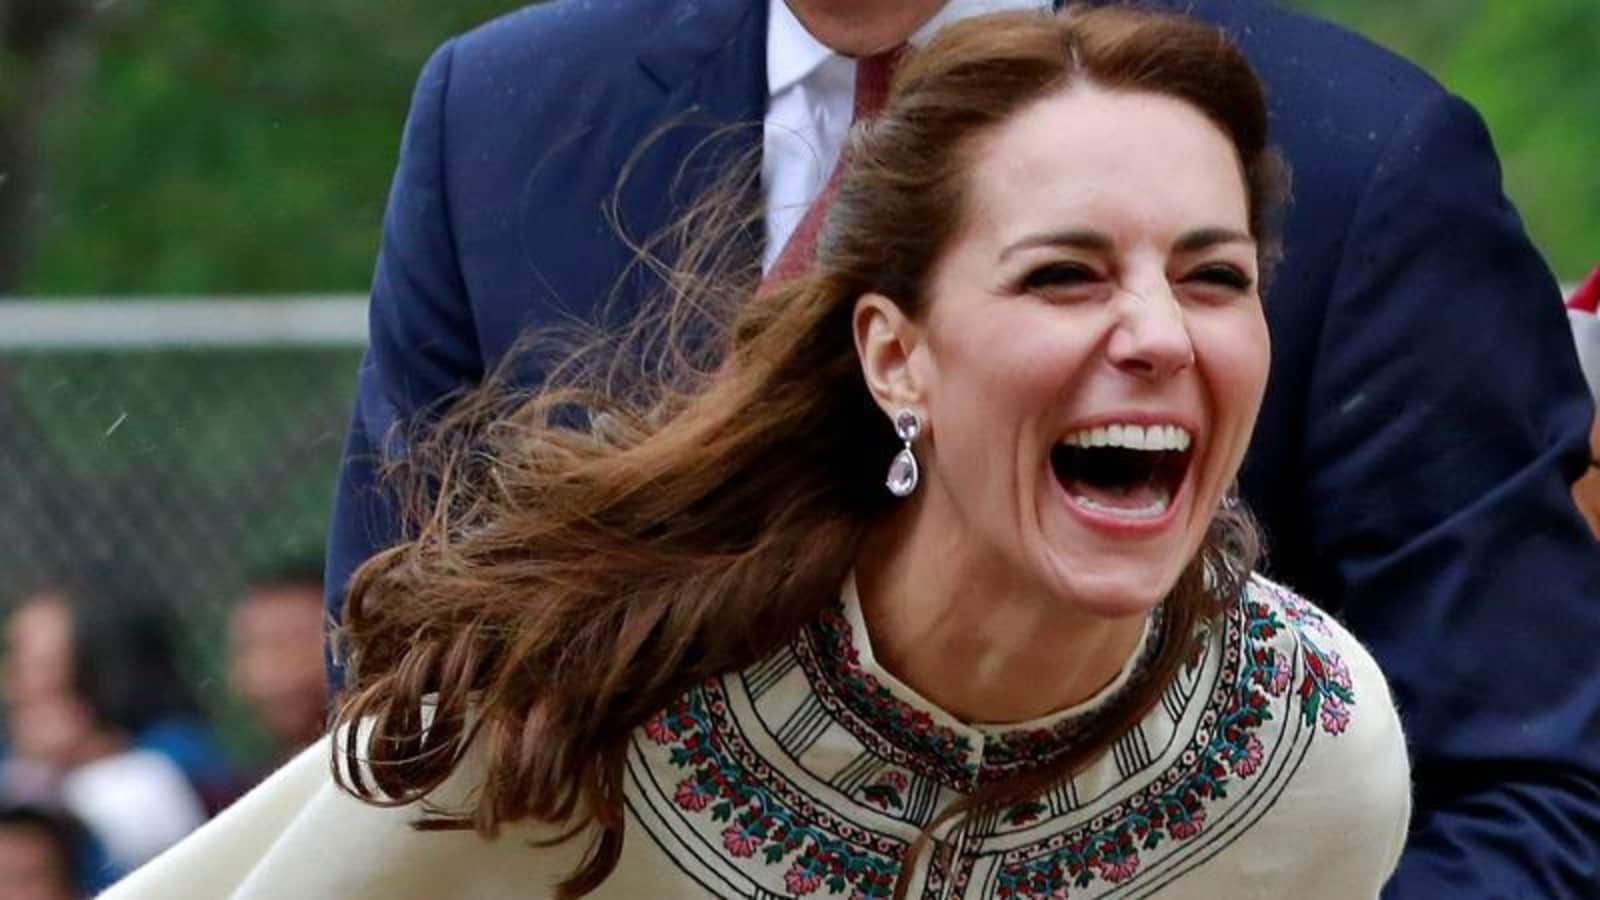 AFP news director labels Kensington Palace as not a ‘tursted source’ amid Kate Middleton's photo fiasco